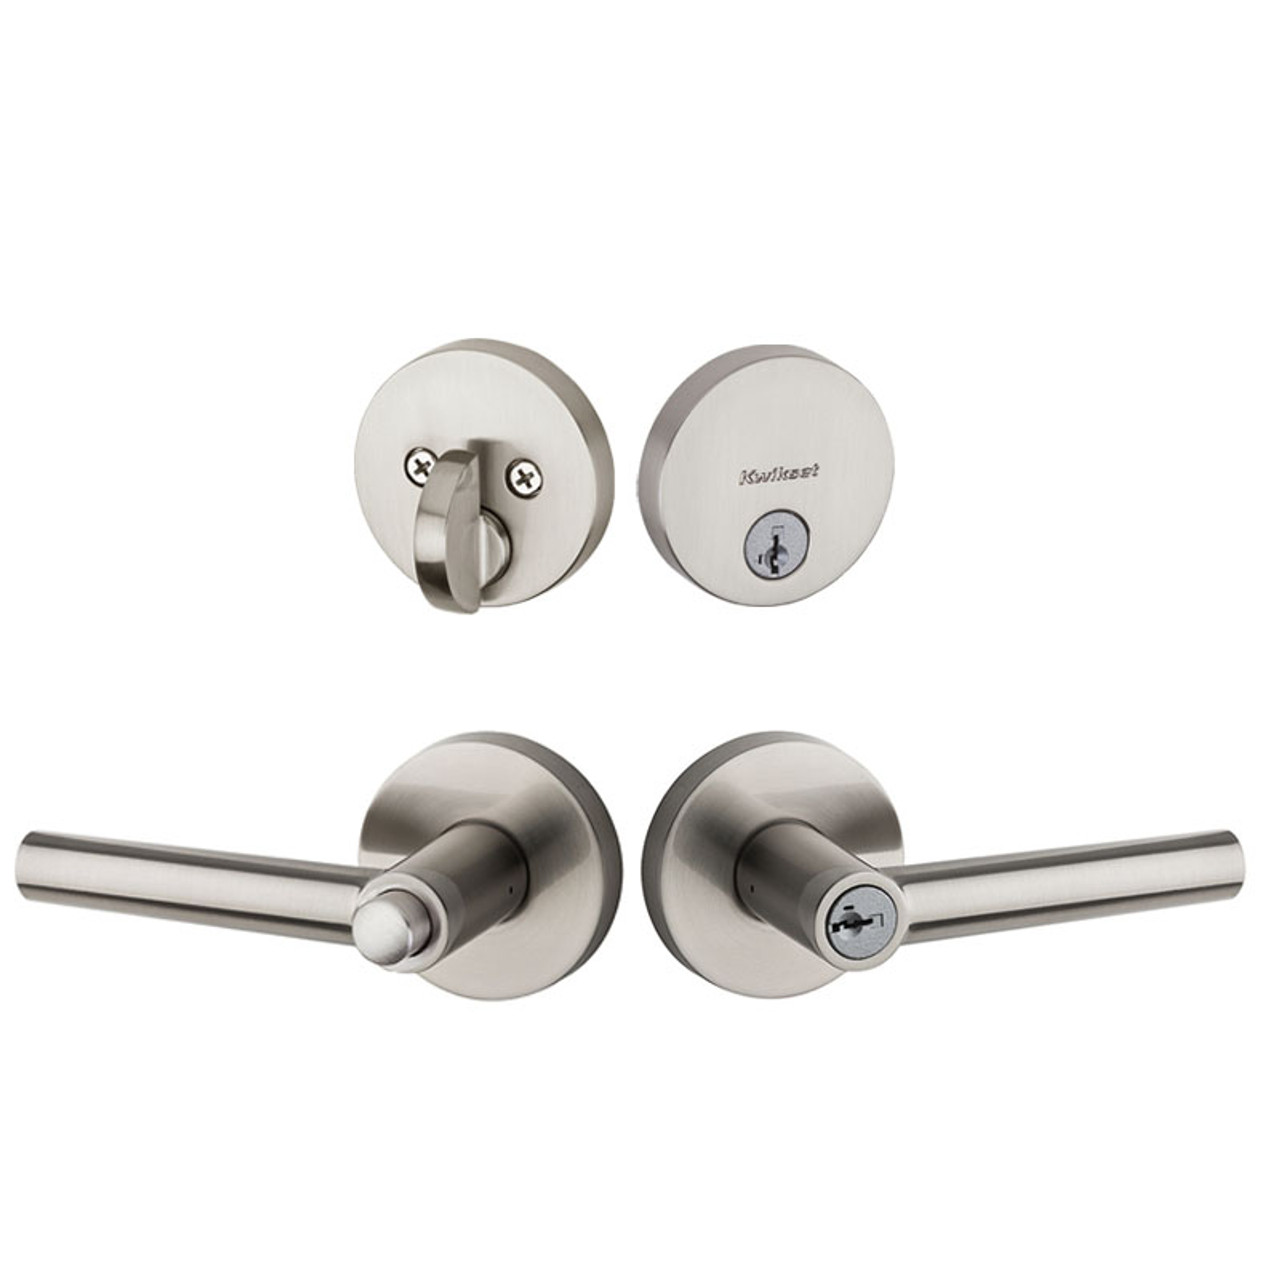 Kwikset 991 Juno Entry Knob and Single Cylinder Deadbolt Combo Pack featuri - 4